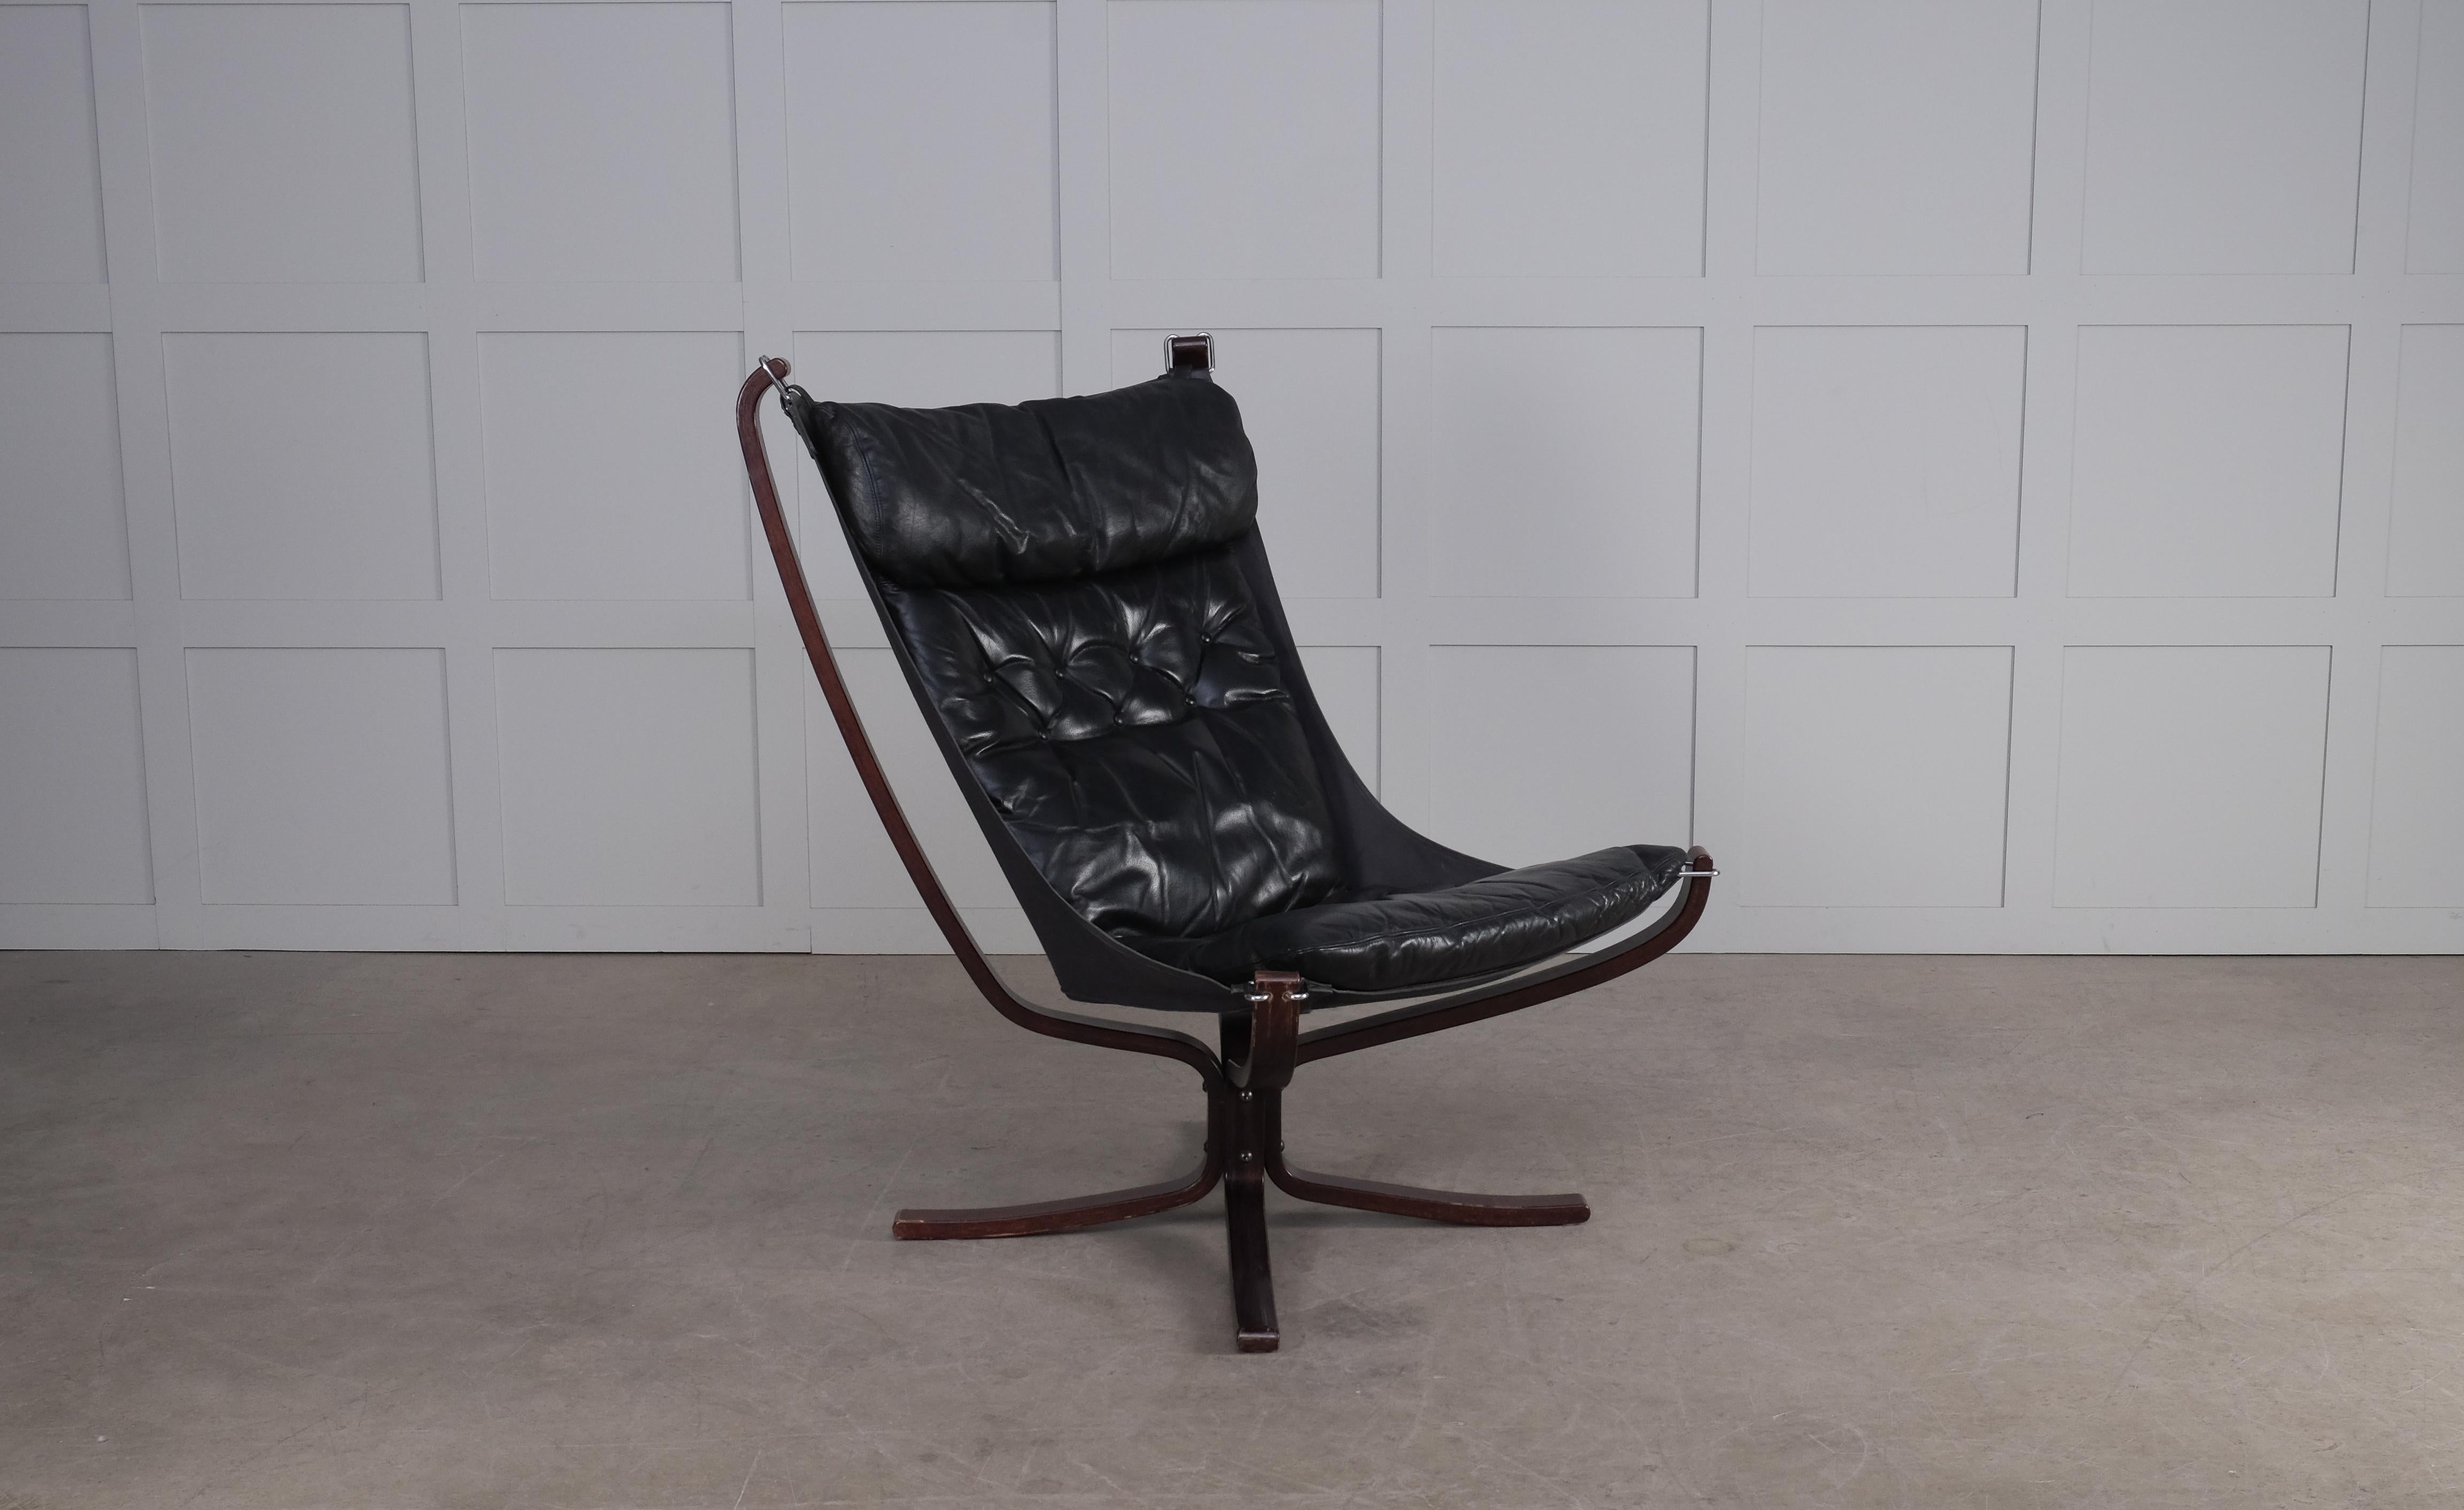 Norwegian Falcon chair in black leather by Sigurd Ressel, Norway, 1970s. 
Very good vintage condition with signs of usage and patina. 
Global front door shipping: €500.

